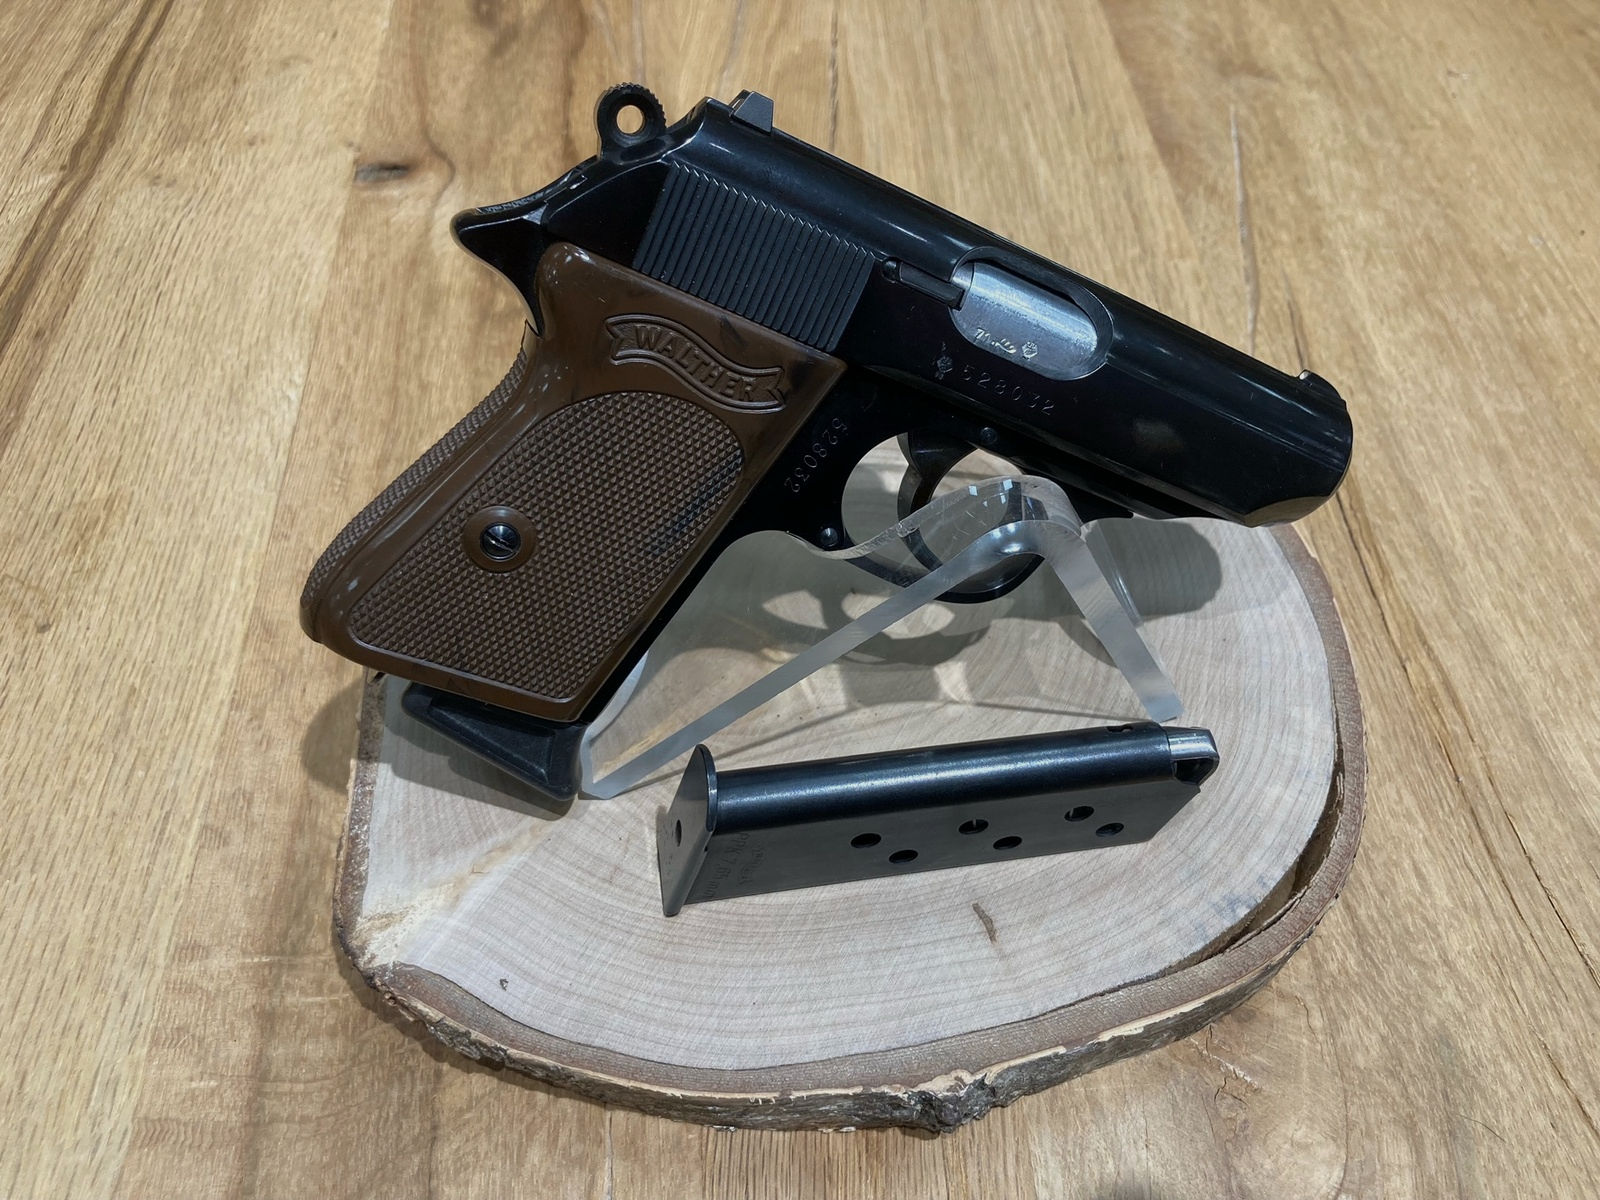 Walther , Mod. PPK-L